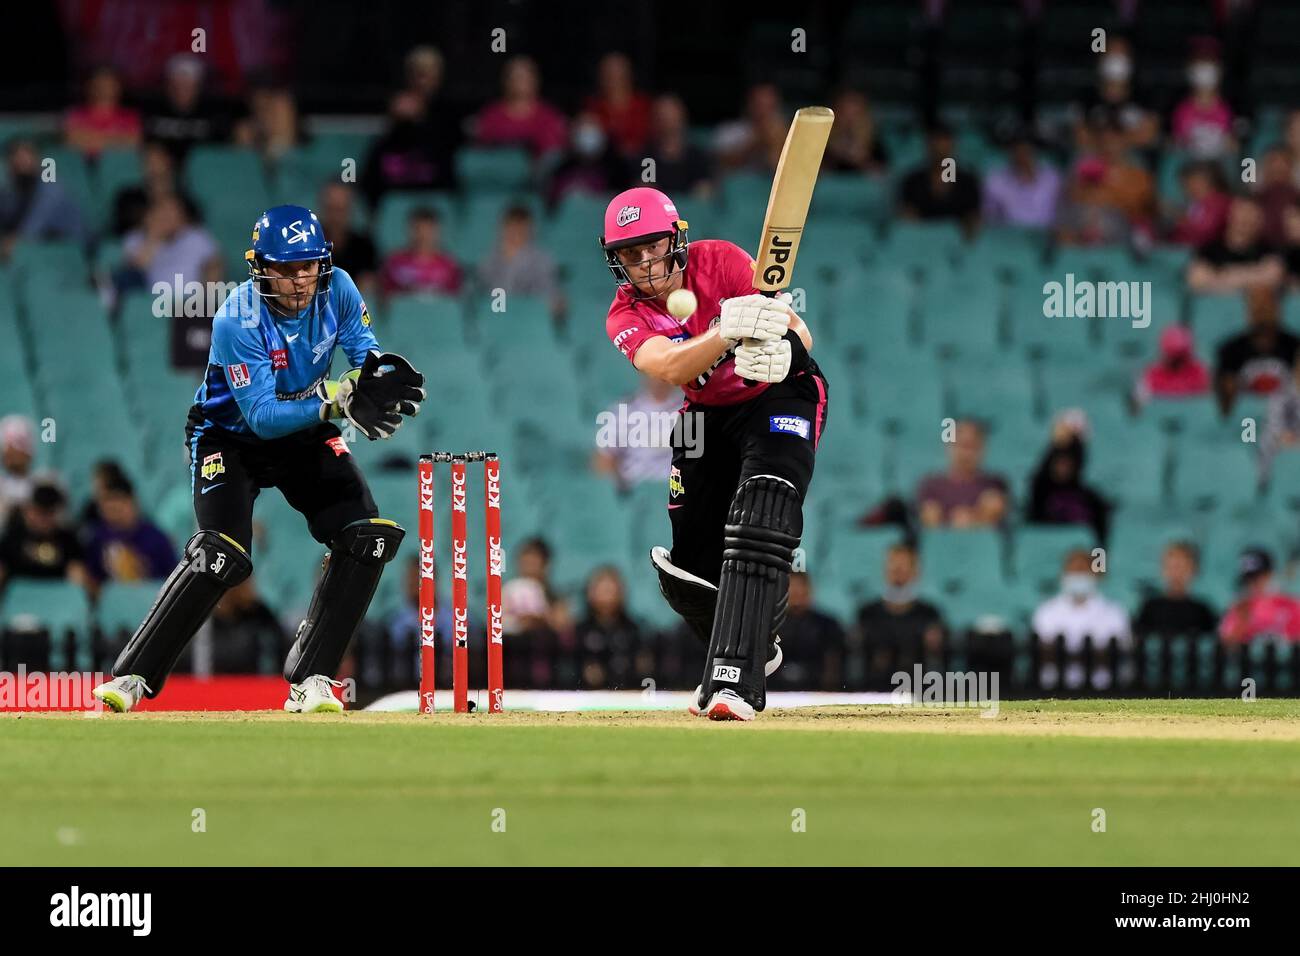 Sydney, Australia, 26 January, 2022. Hayden Kerr of the Sixers hits the ball during the Big Bash League Challenger cricket match between Sydney Sixers and Adelaide Strikers at The Sydney Cricket Ground on January 26, 2022 in Sydney, Australia. Credit: Steven Markham/Speed Media/Alamy Live News Stock Photo